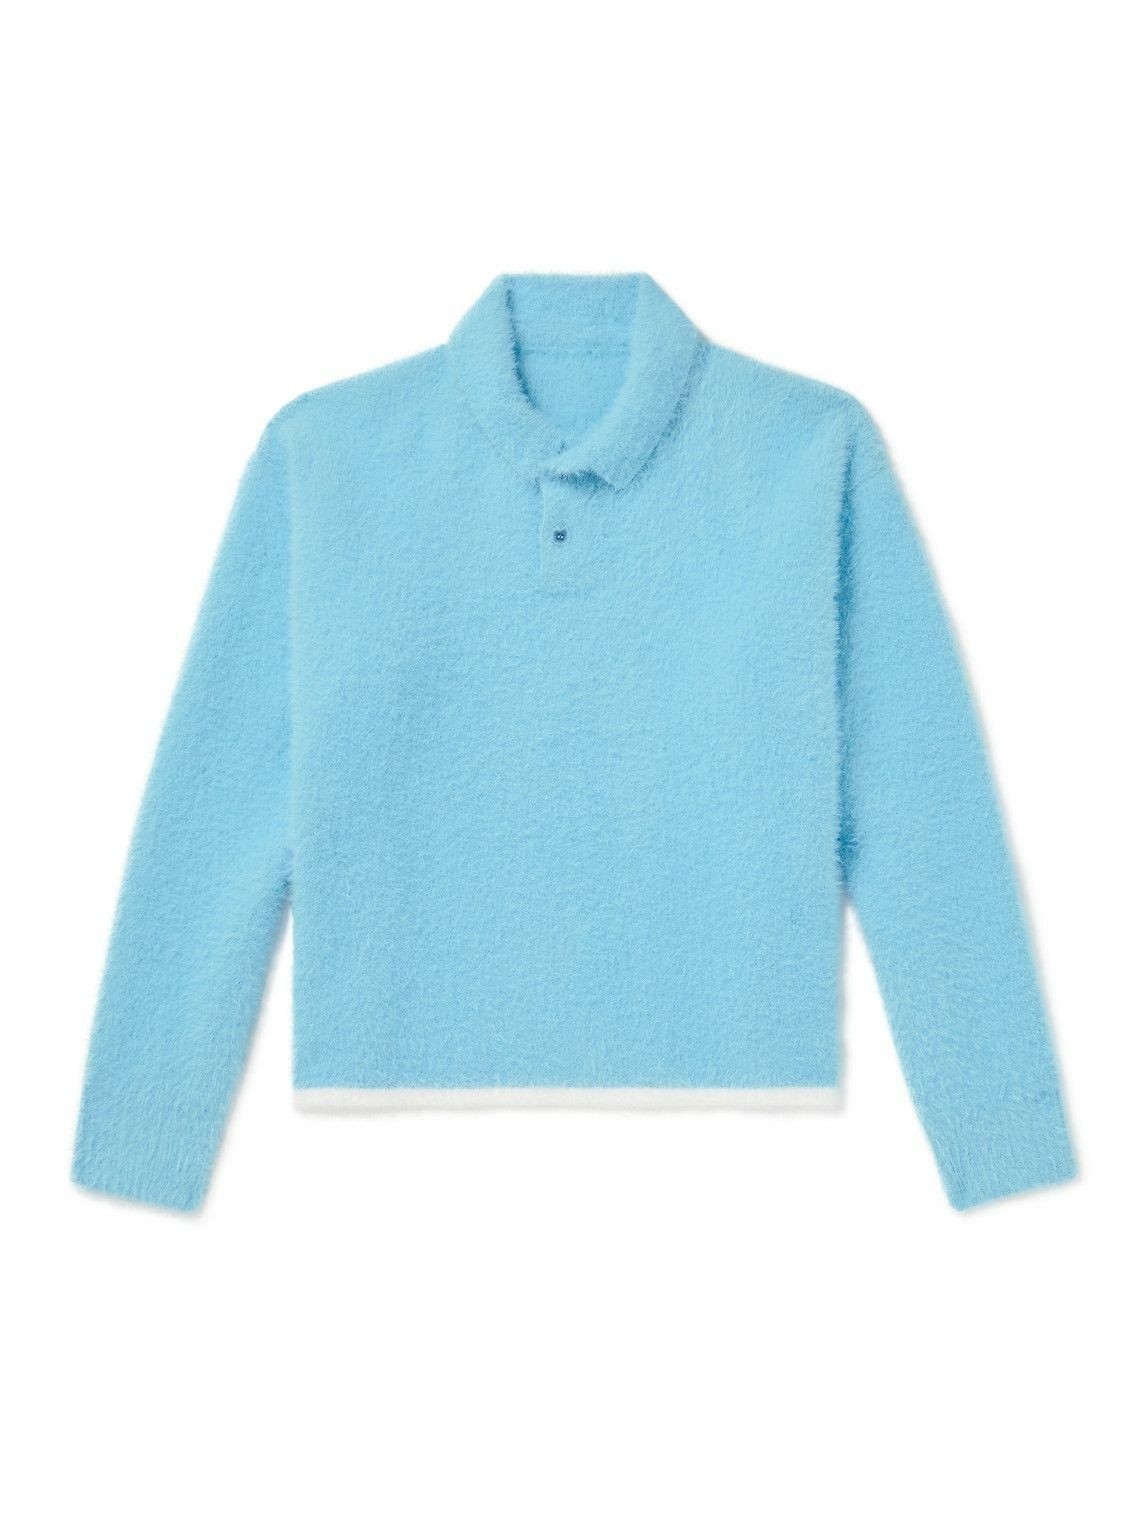 Jacquemus - Polo Neve Brushed-Knit Sweater - Blue Jacquemus